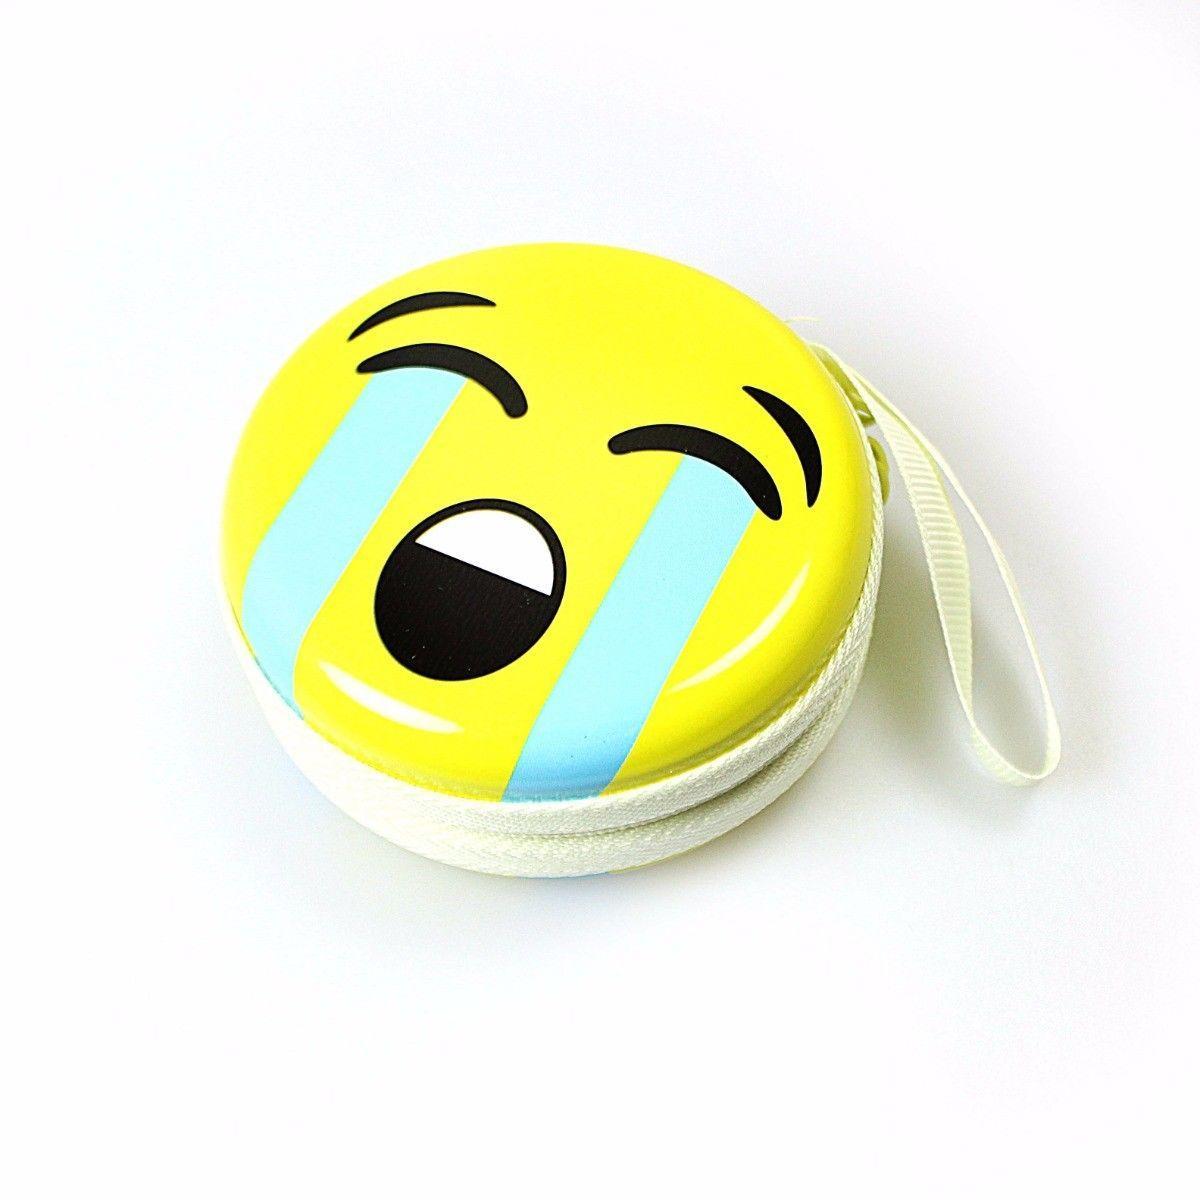 Assorted Emoji Face Earphone Pouch 7.5cm x 7cm   4496 (Large Letter Rate)